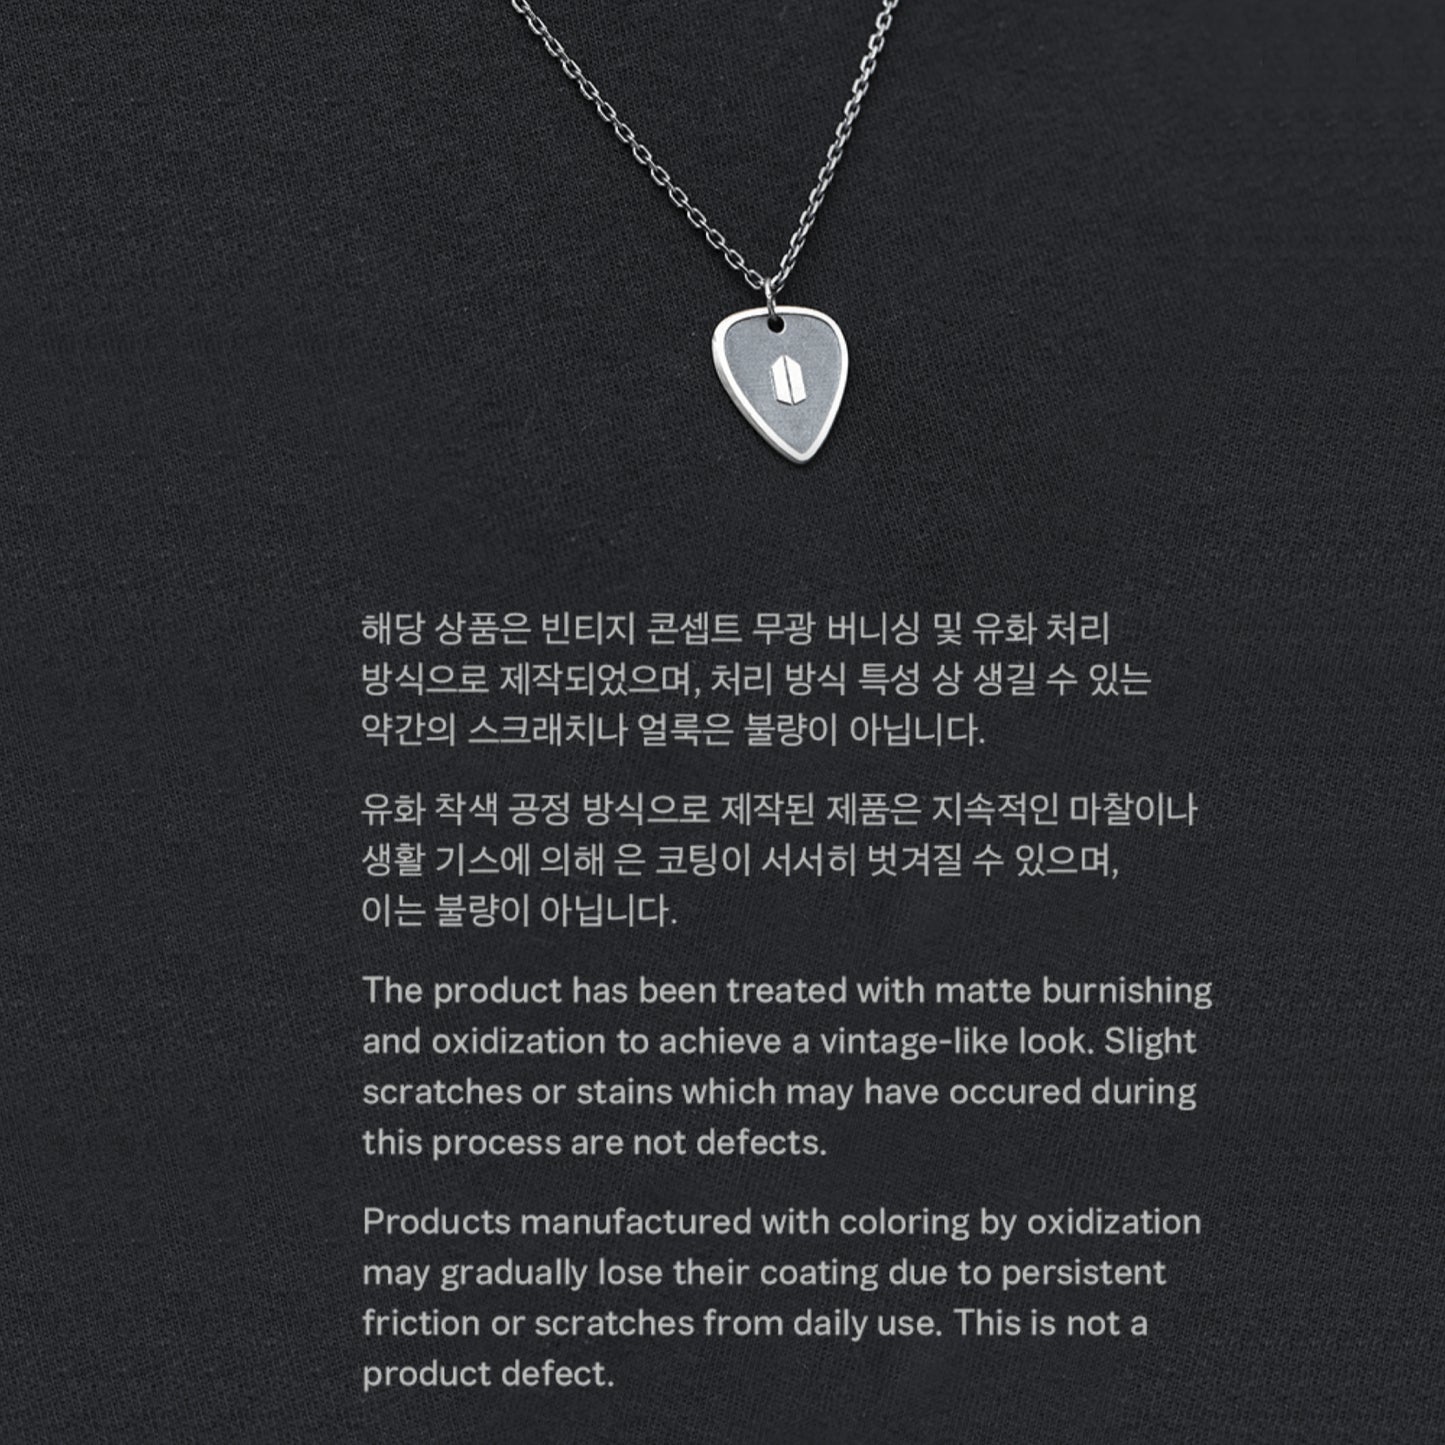 BTS | ARTIST-MADE COLLECTION BY BTS | SUGA - GUITAR PICK NECKLACE